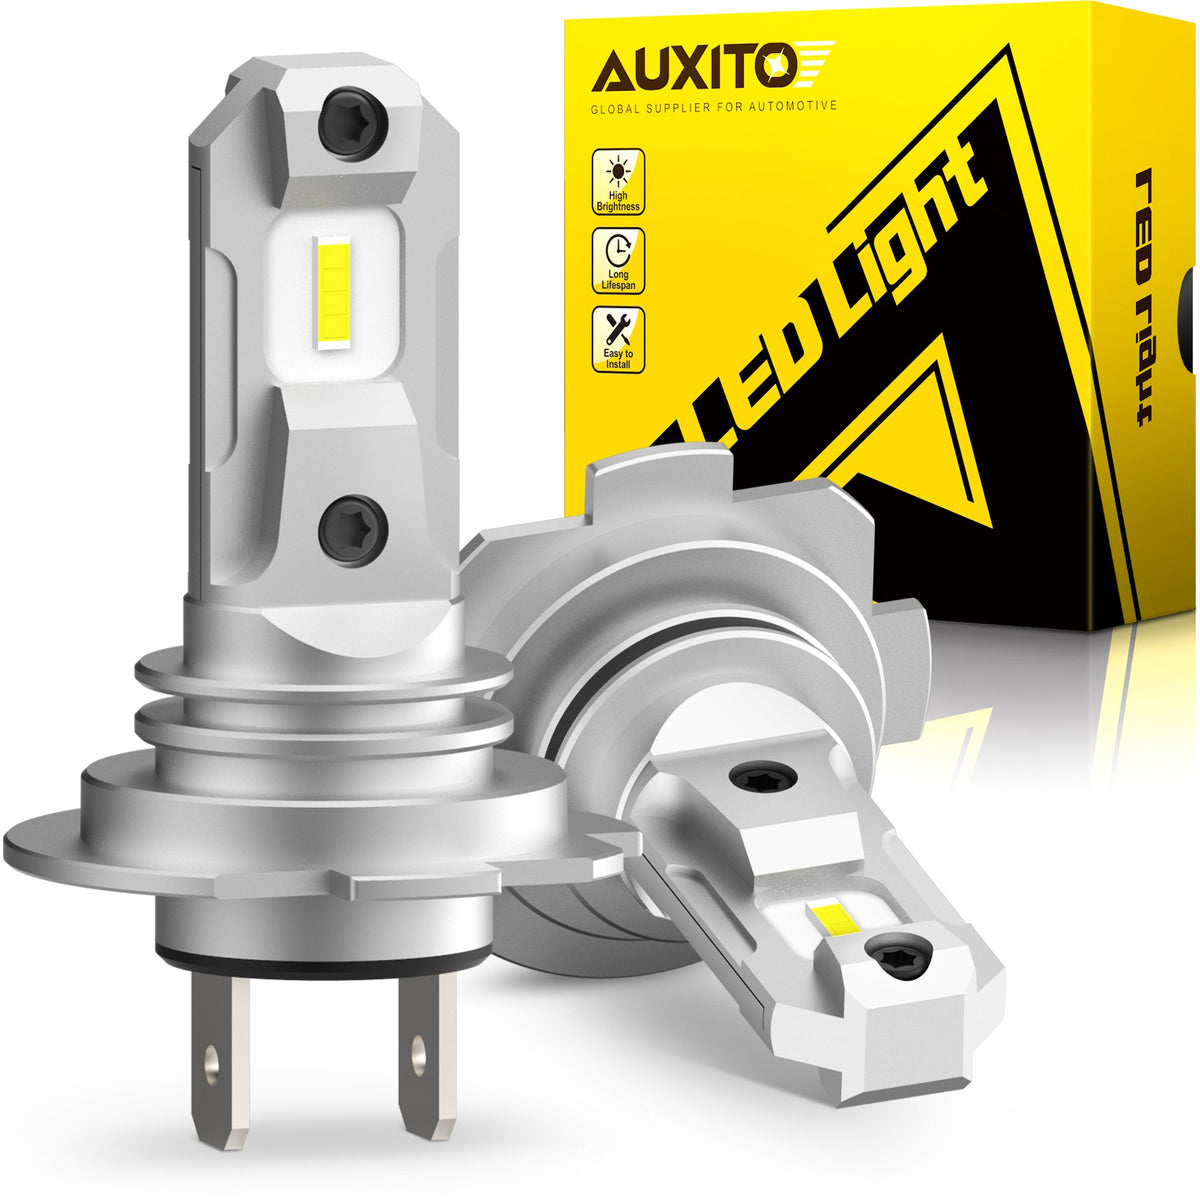 AUXITO H7 LED Bulb, Fanless 6500K with 8 CSP Chips Size